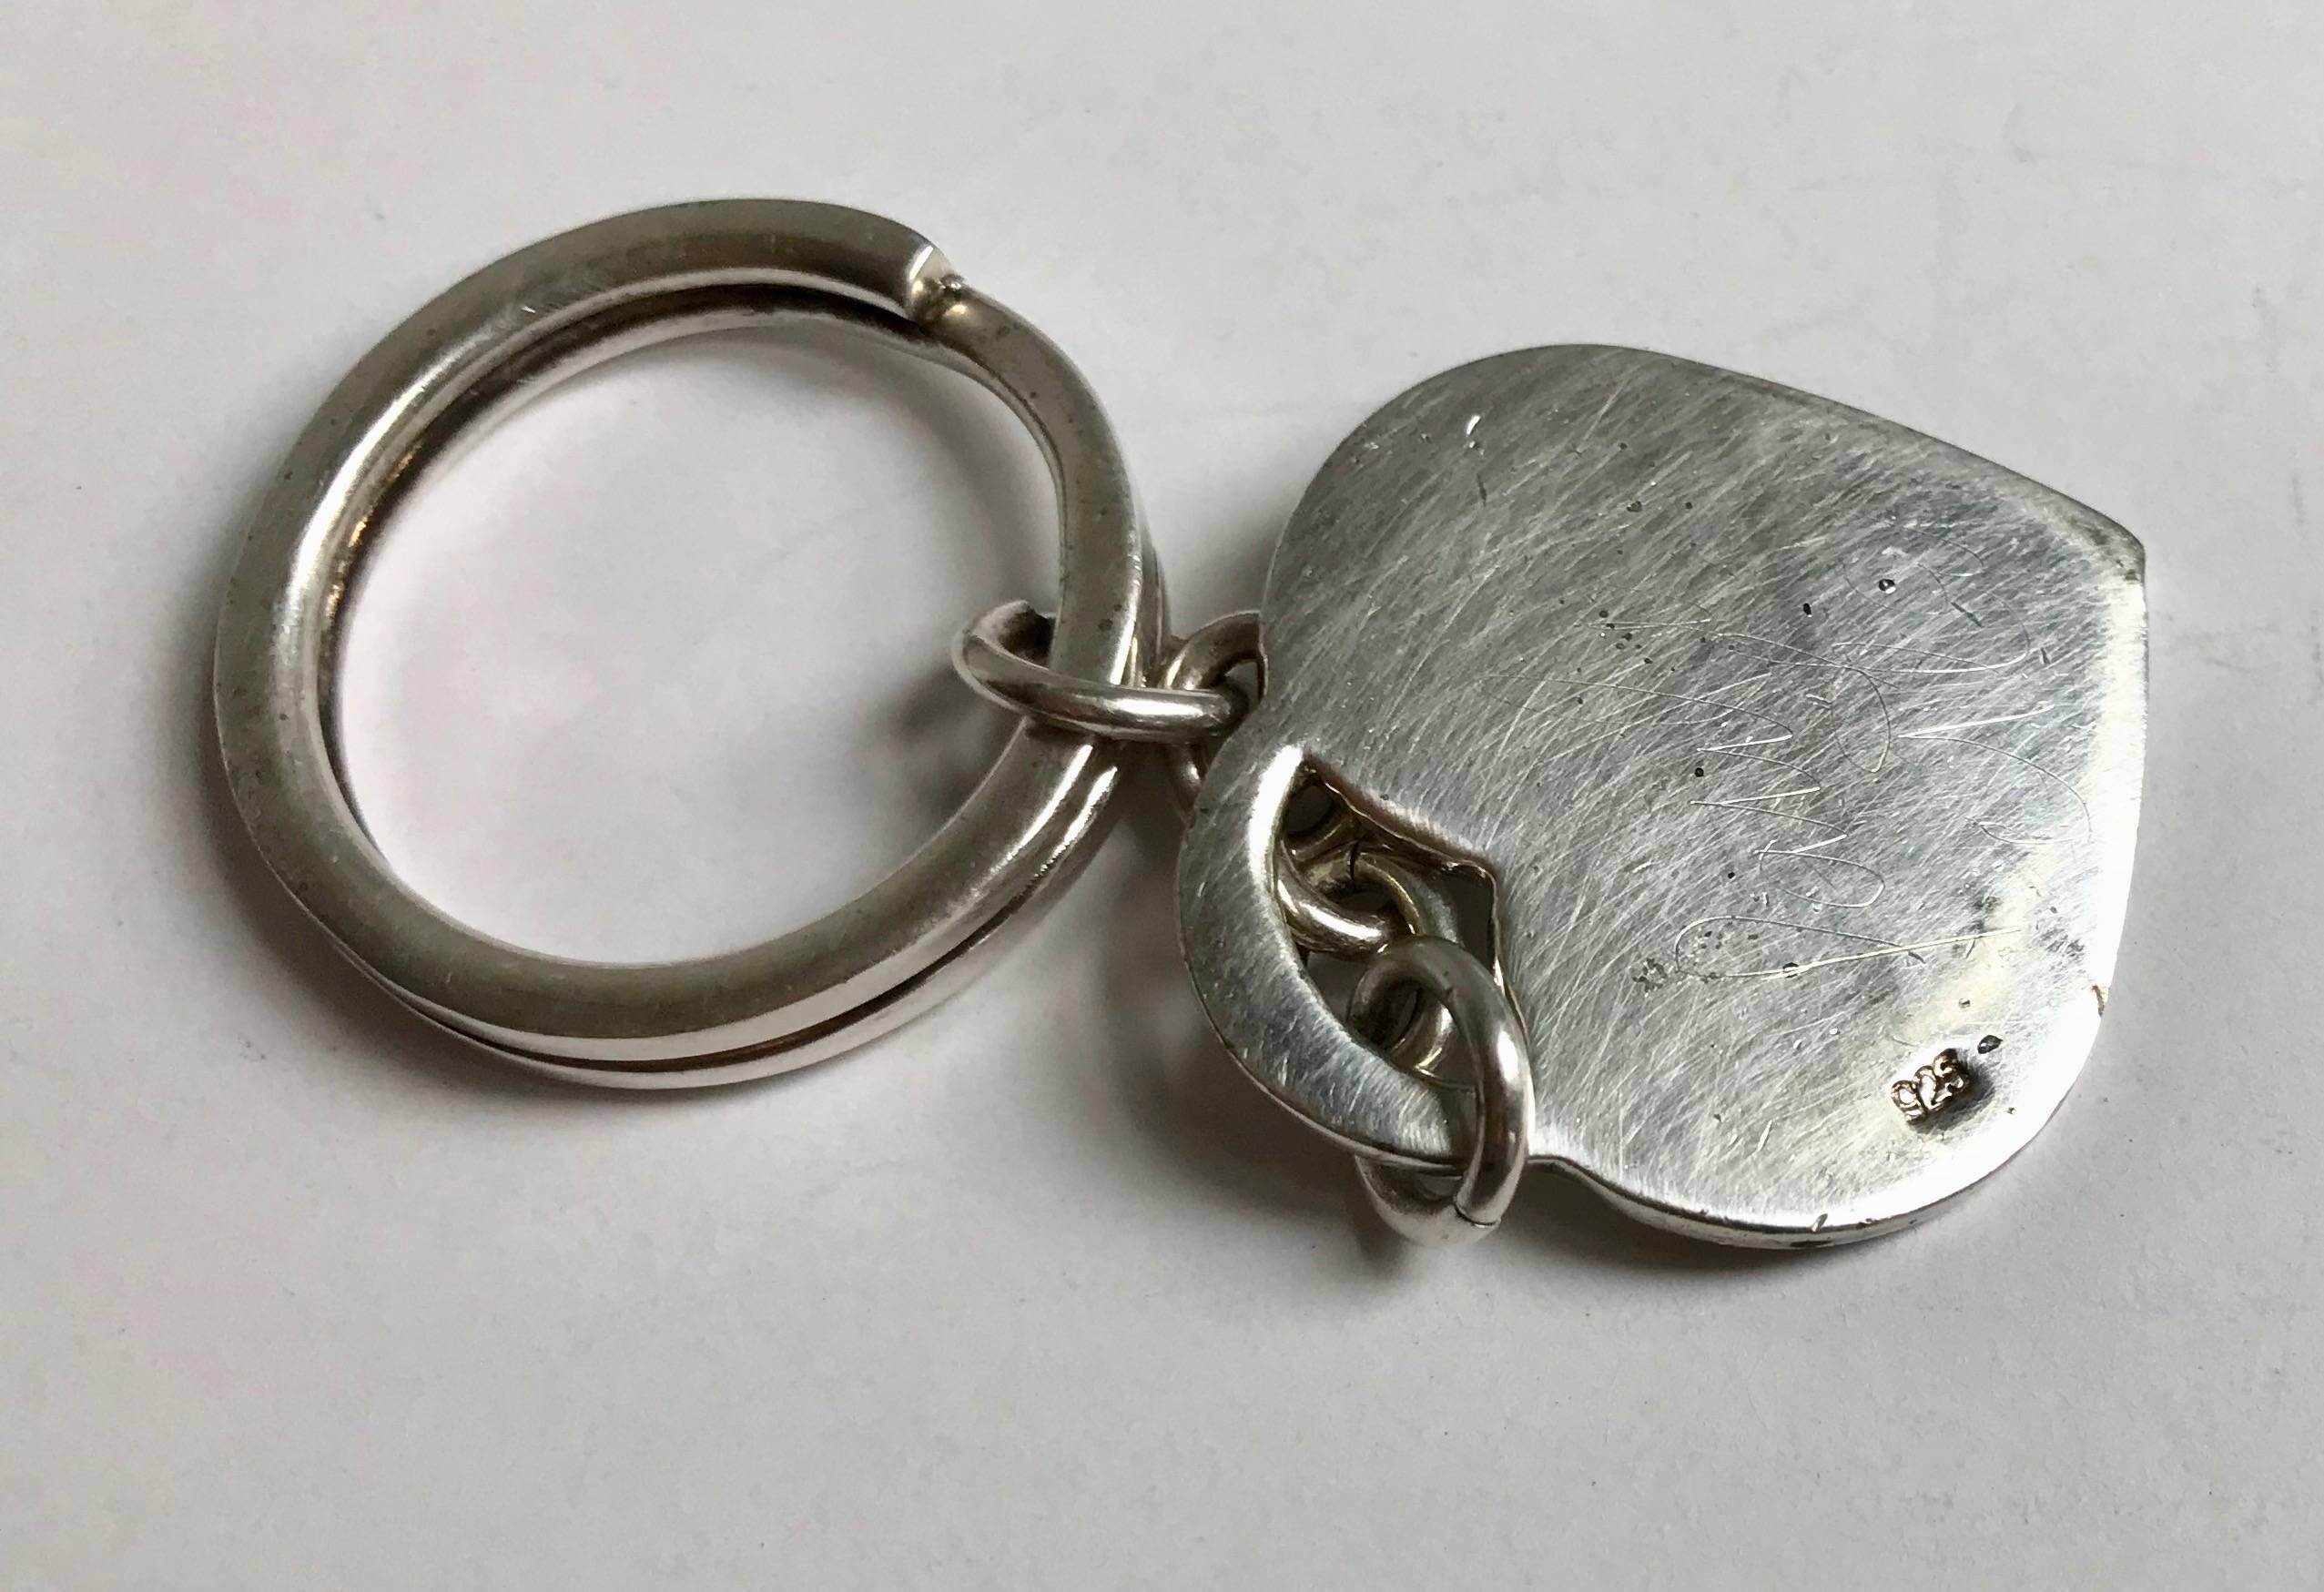 A lovely sterling silver key chain -  Marked 925